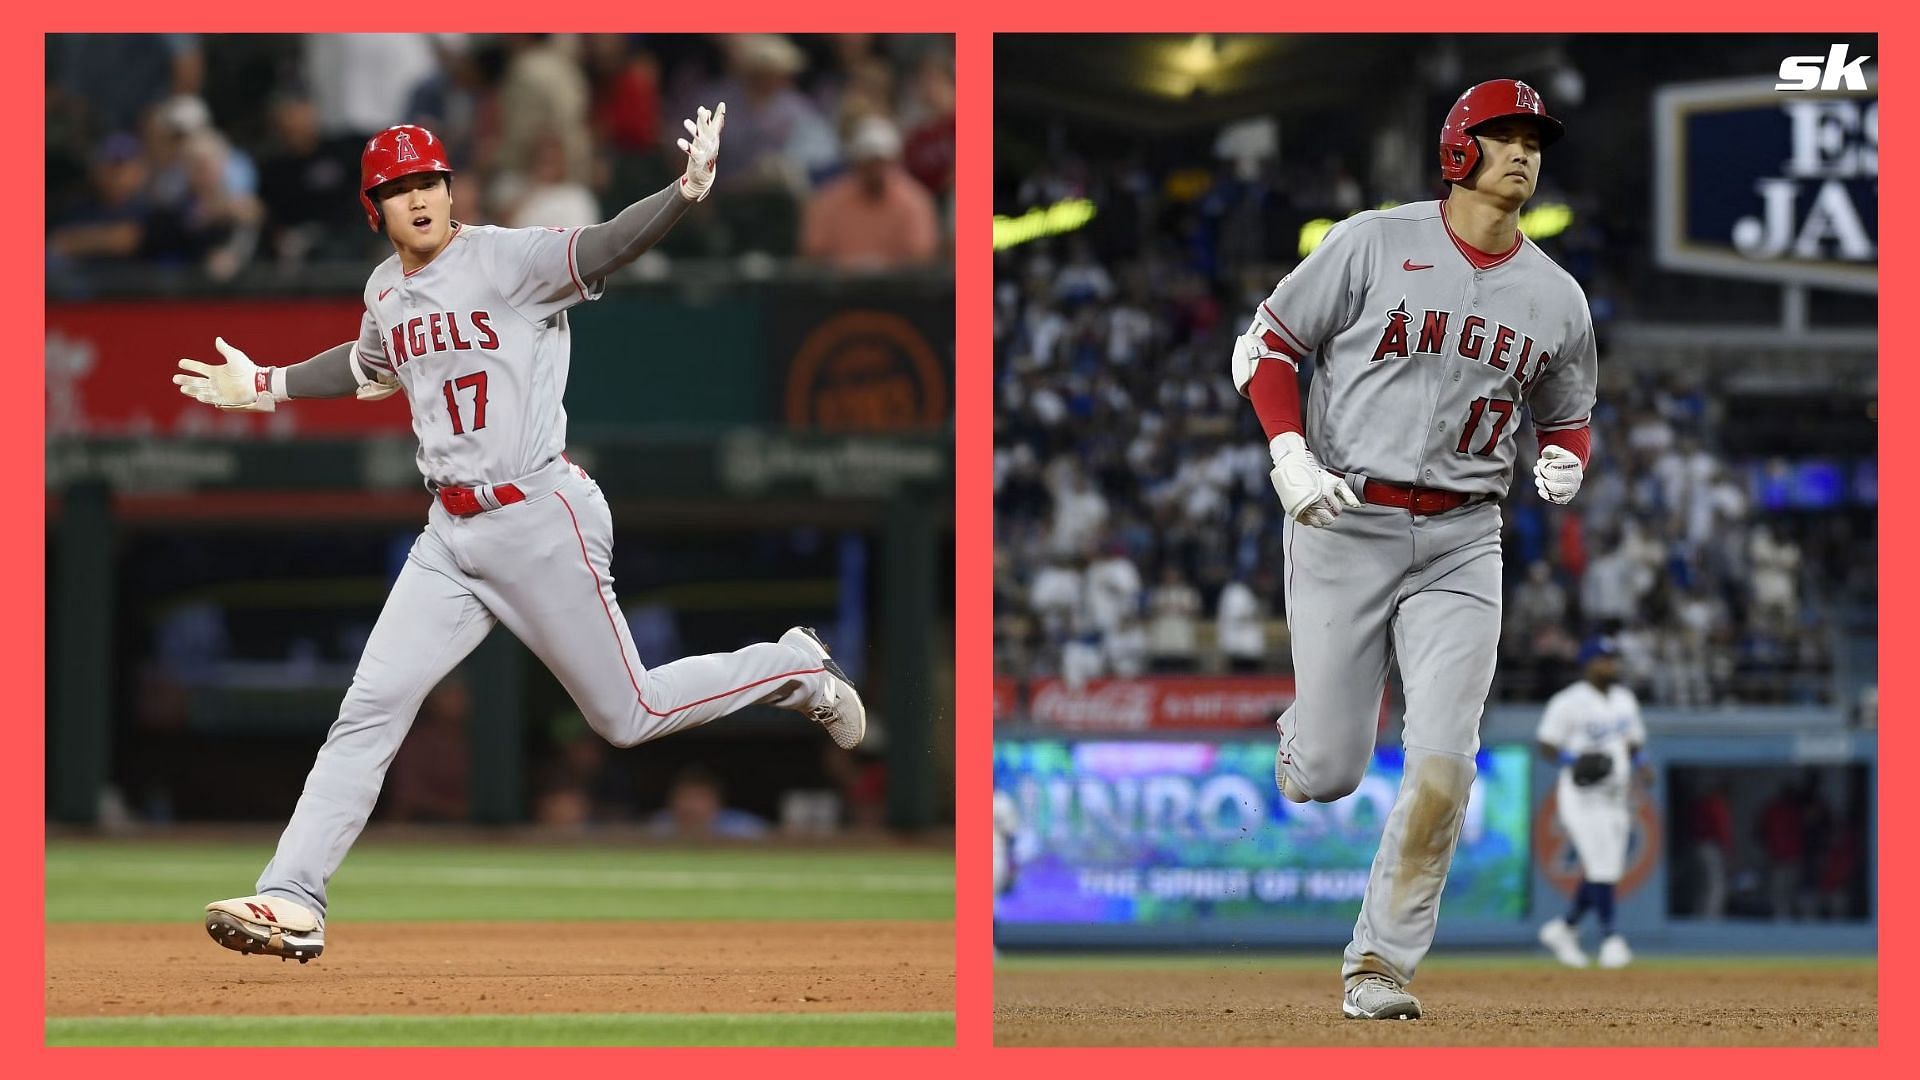 Shohei Ohtani is single-handedly carrying the Los Angeles Angels despite lack of wins.